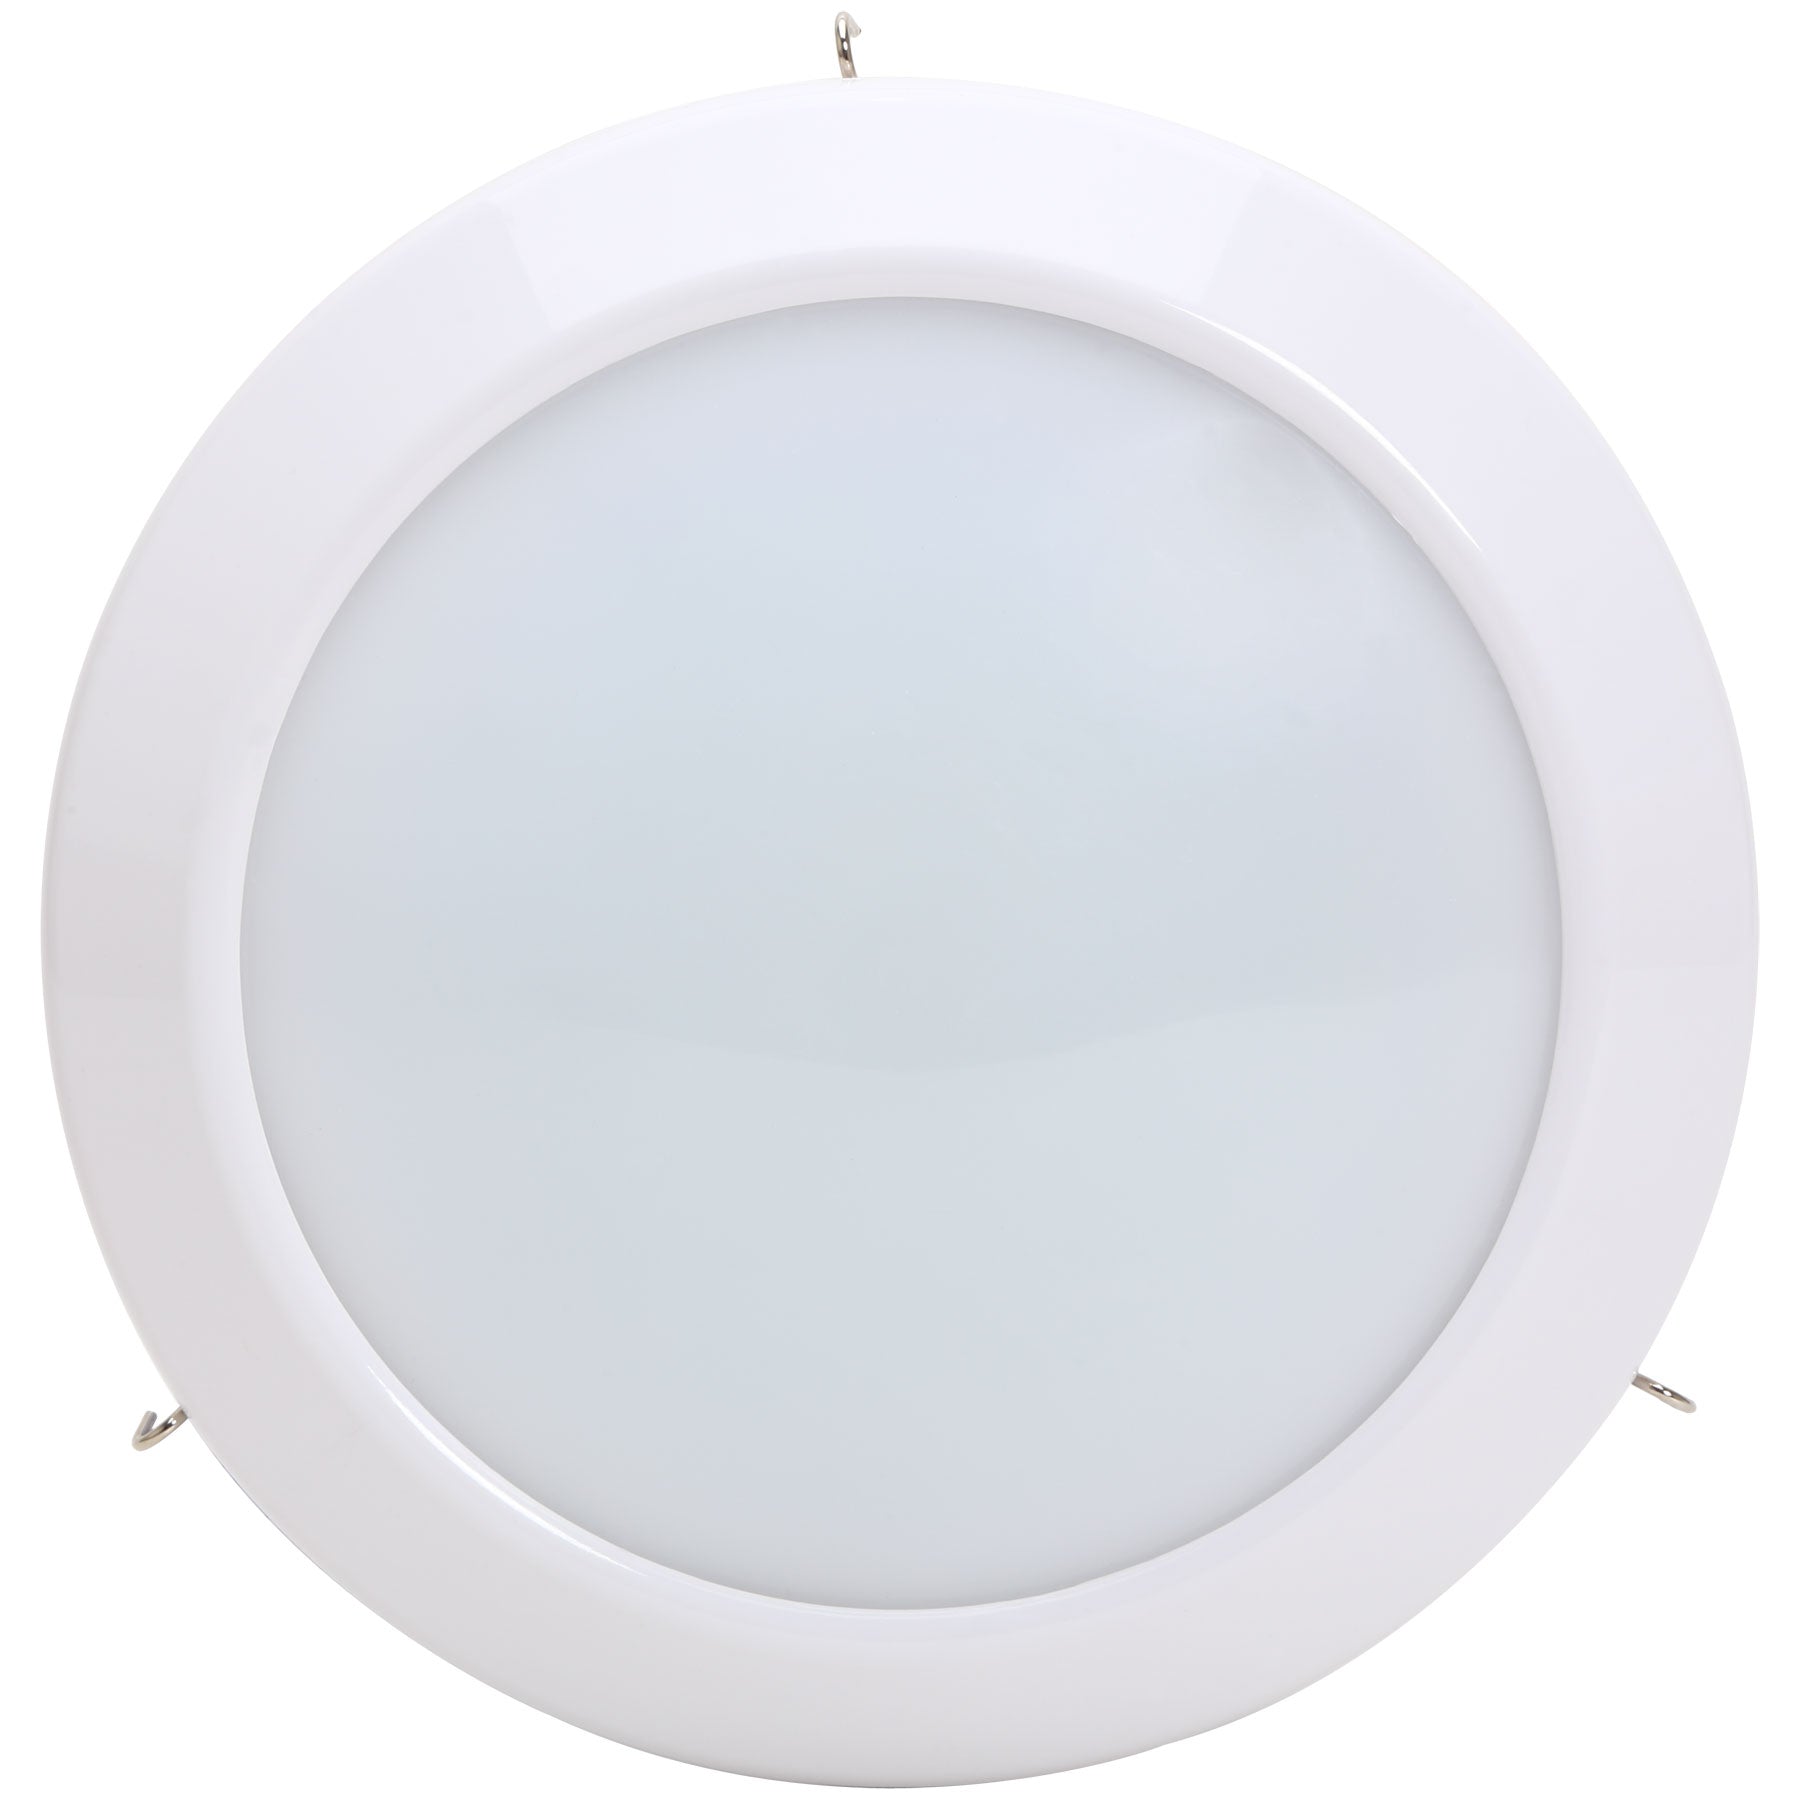 Energy-efficient LED light disc with low energy consumption and high lumen output